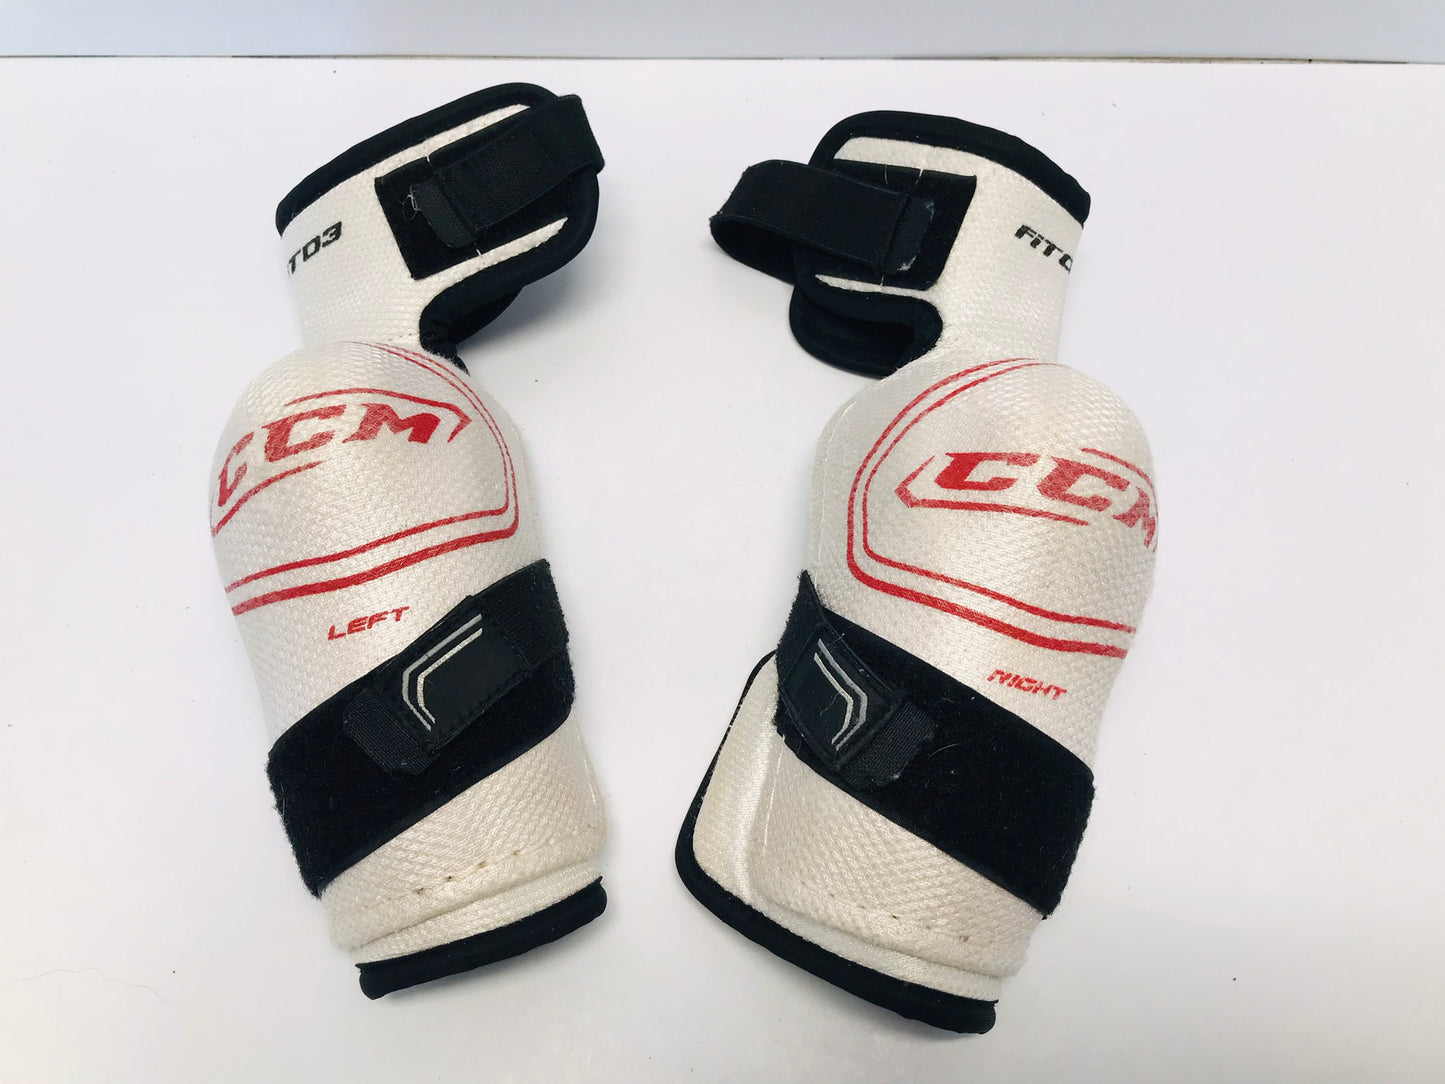 Hockey Elbow Pads Child Size Junior Small Age 6-8 Bauer Supreme Team Canada White Red Slim Fit